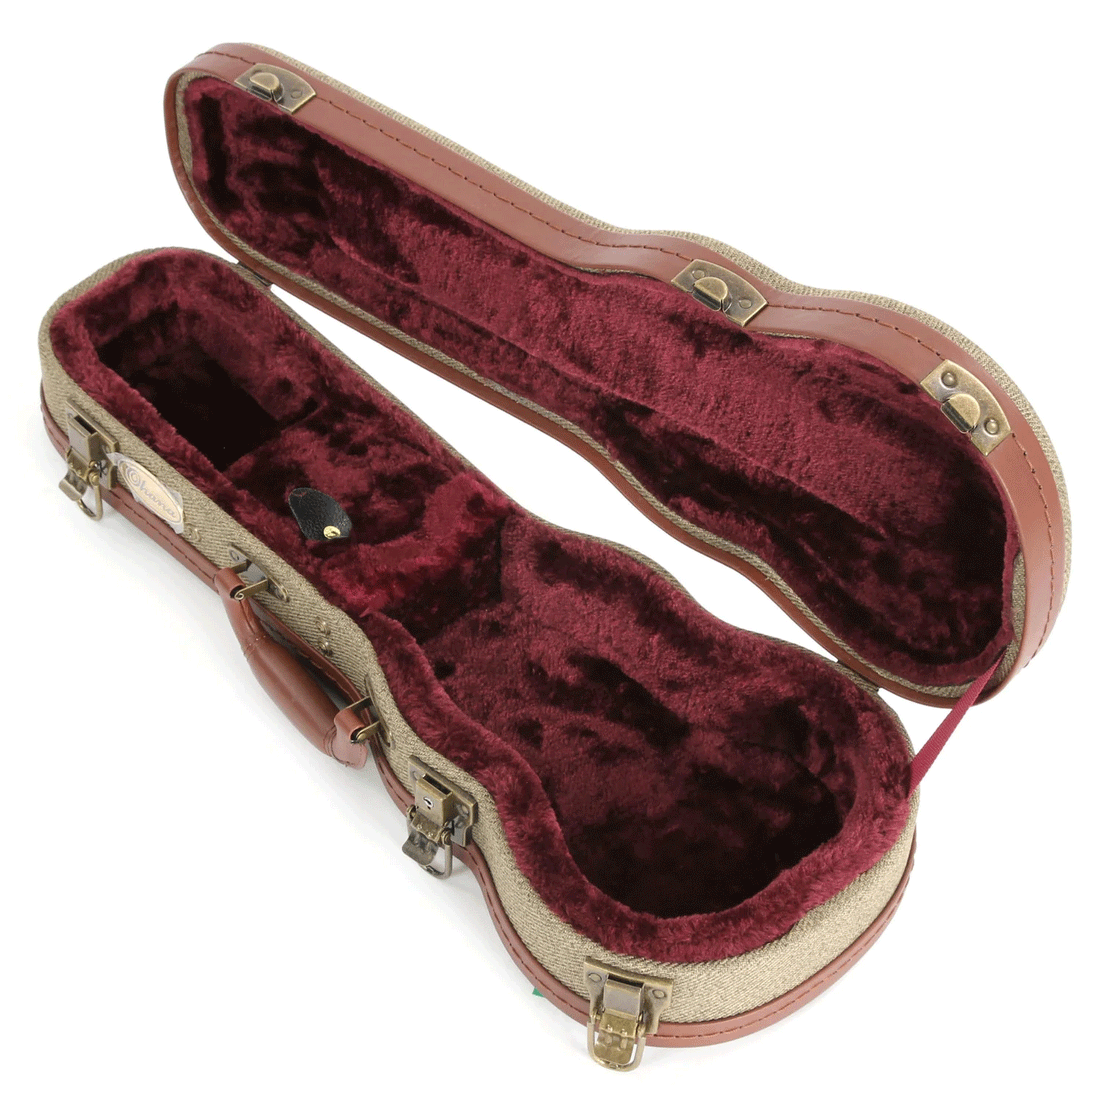 Ohana Hardcase UOT-24 Concert Ukulele Case Durable Olive Twill Fabric Arched Top Design for Extra Instrument Protection Brown Tolex Trim with Sewn Stitching and Matching Handle Antique Bronze Drawbolt Case Latches Antique Bronze Side and Bottom Stops for Extra Stability &amp; Protection Padded Plush Interior Velvet in Wine Color Interior Heel Rest with Storage Compartment Ukulele Trading Co Australia